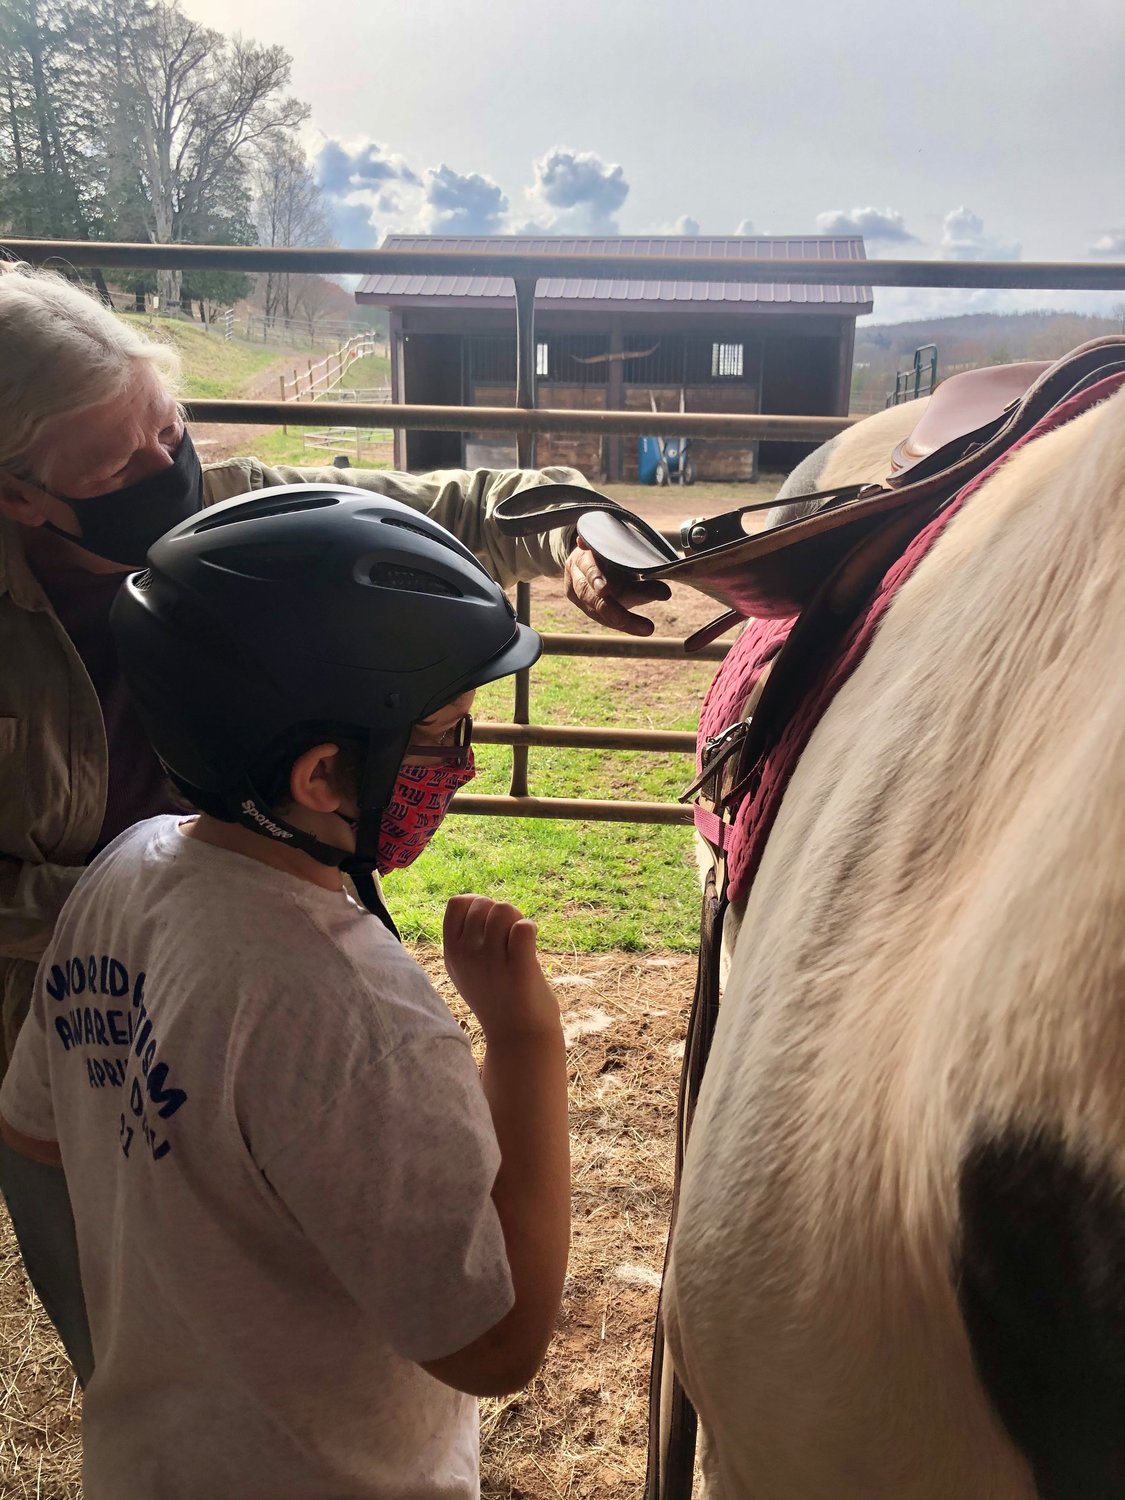 Therapeutic riding has benefits that go far beyond the physical. A new center, Fair Hill, has opened in Damascus.